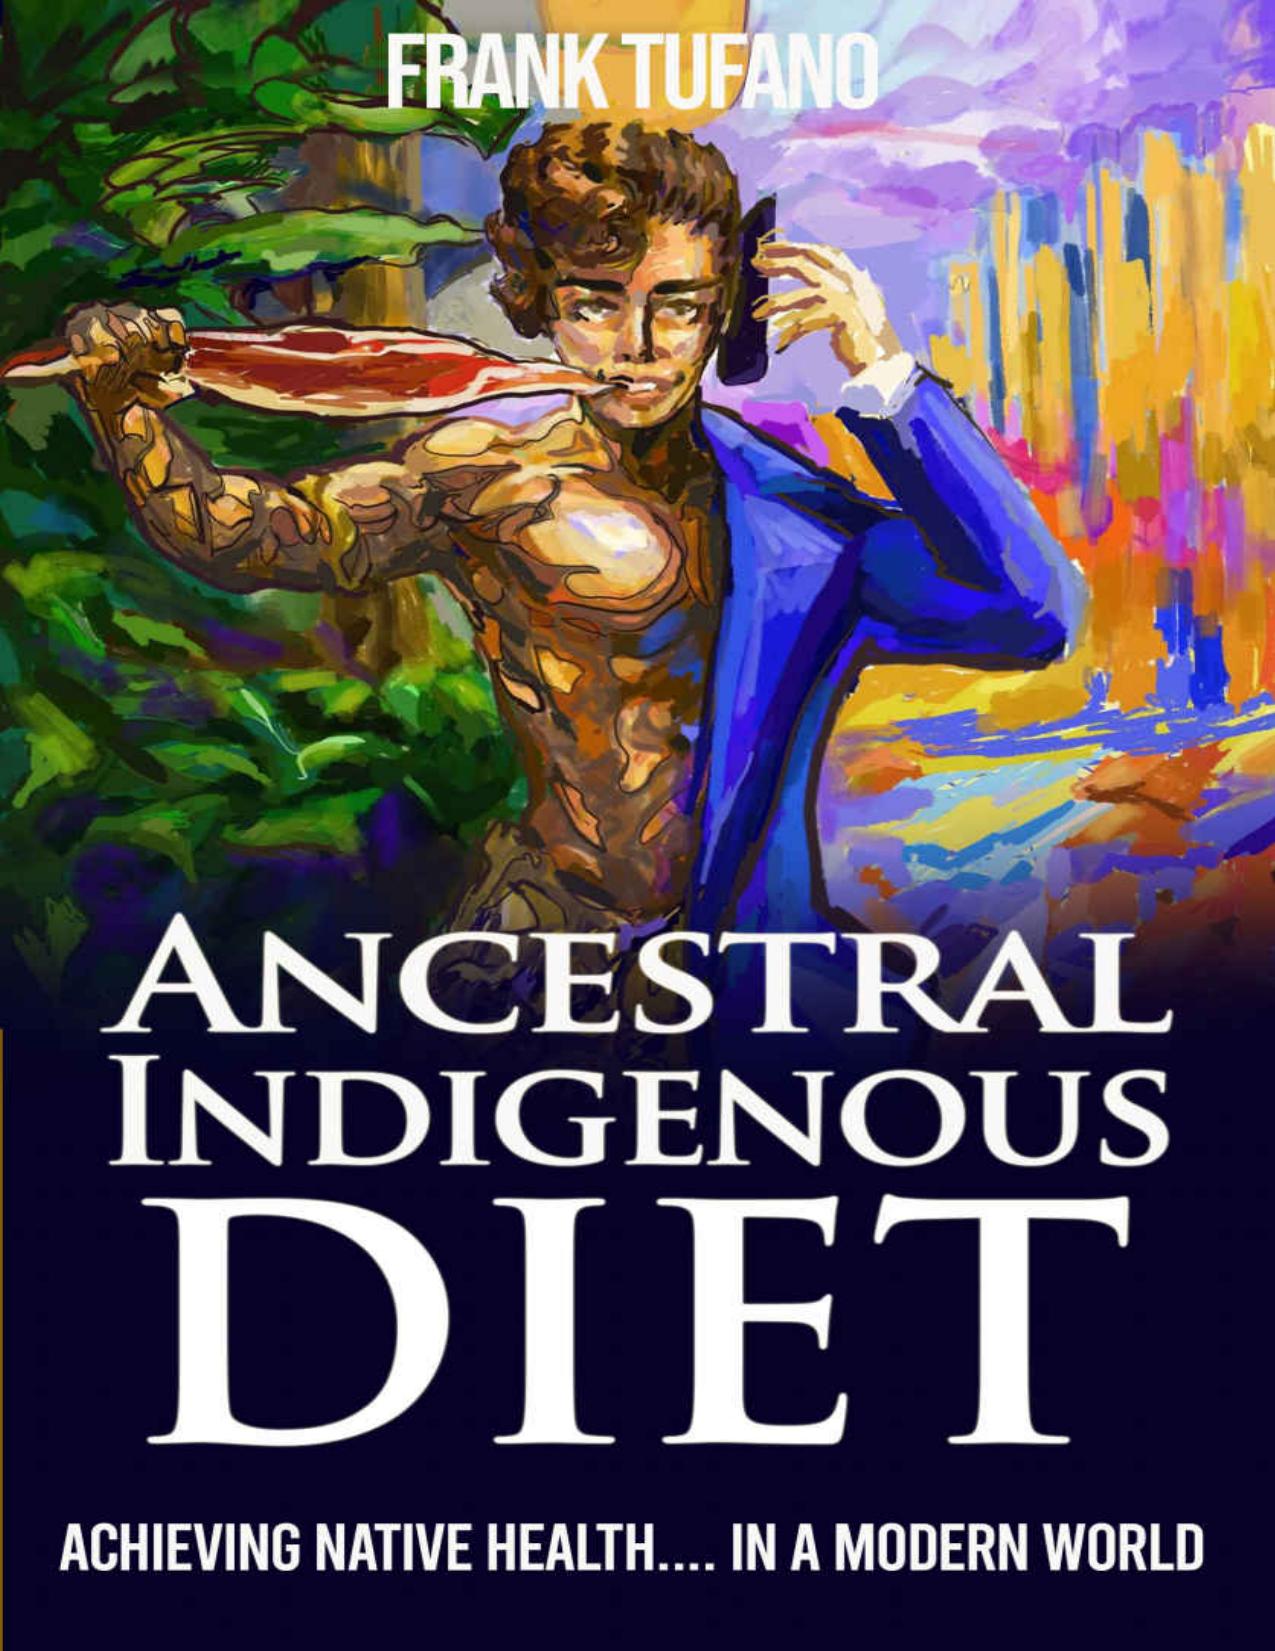 The Ancestral Indigenous Diet: A Whole Foods Meat-Based Carnivore Diet by Frank Tufano